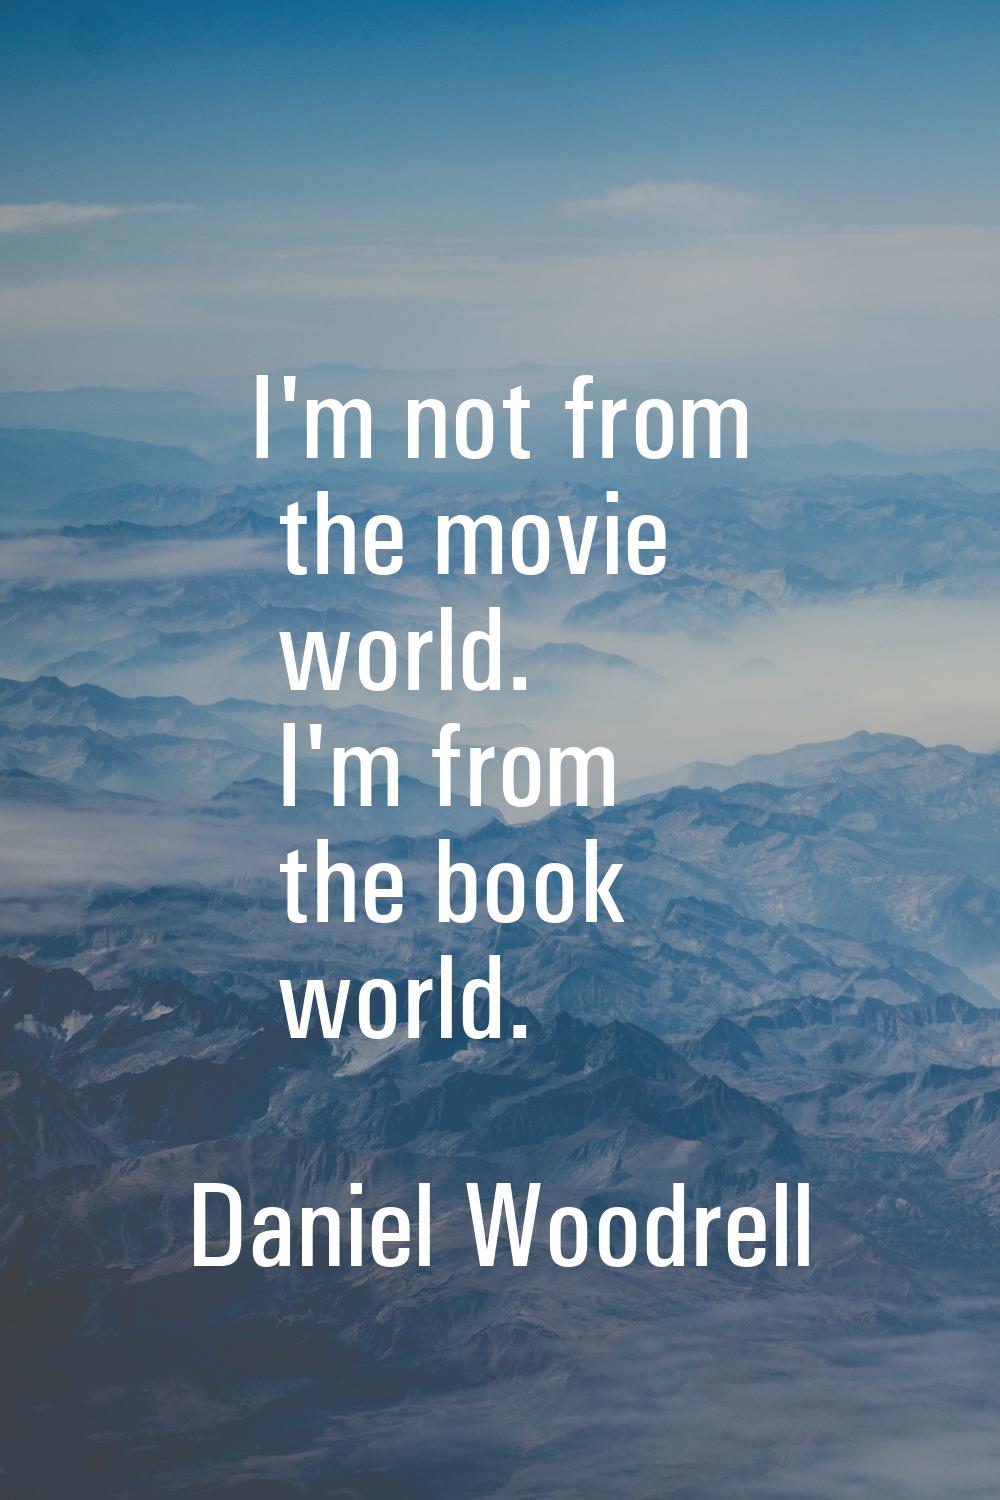 I'm not from the movie world. I'm from the book world.